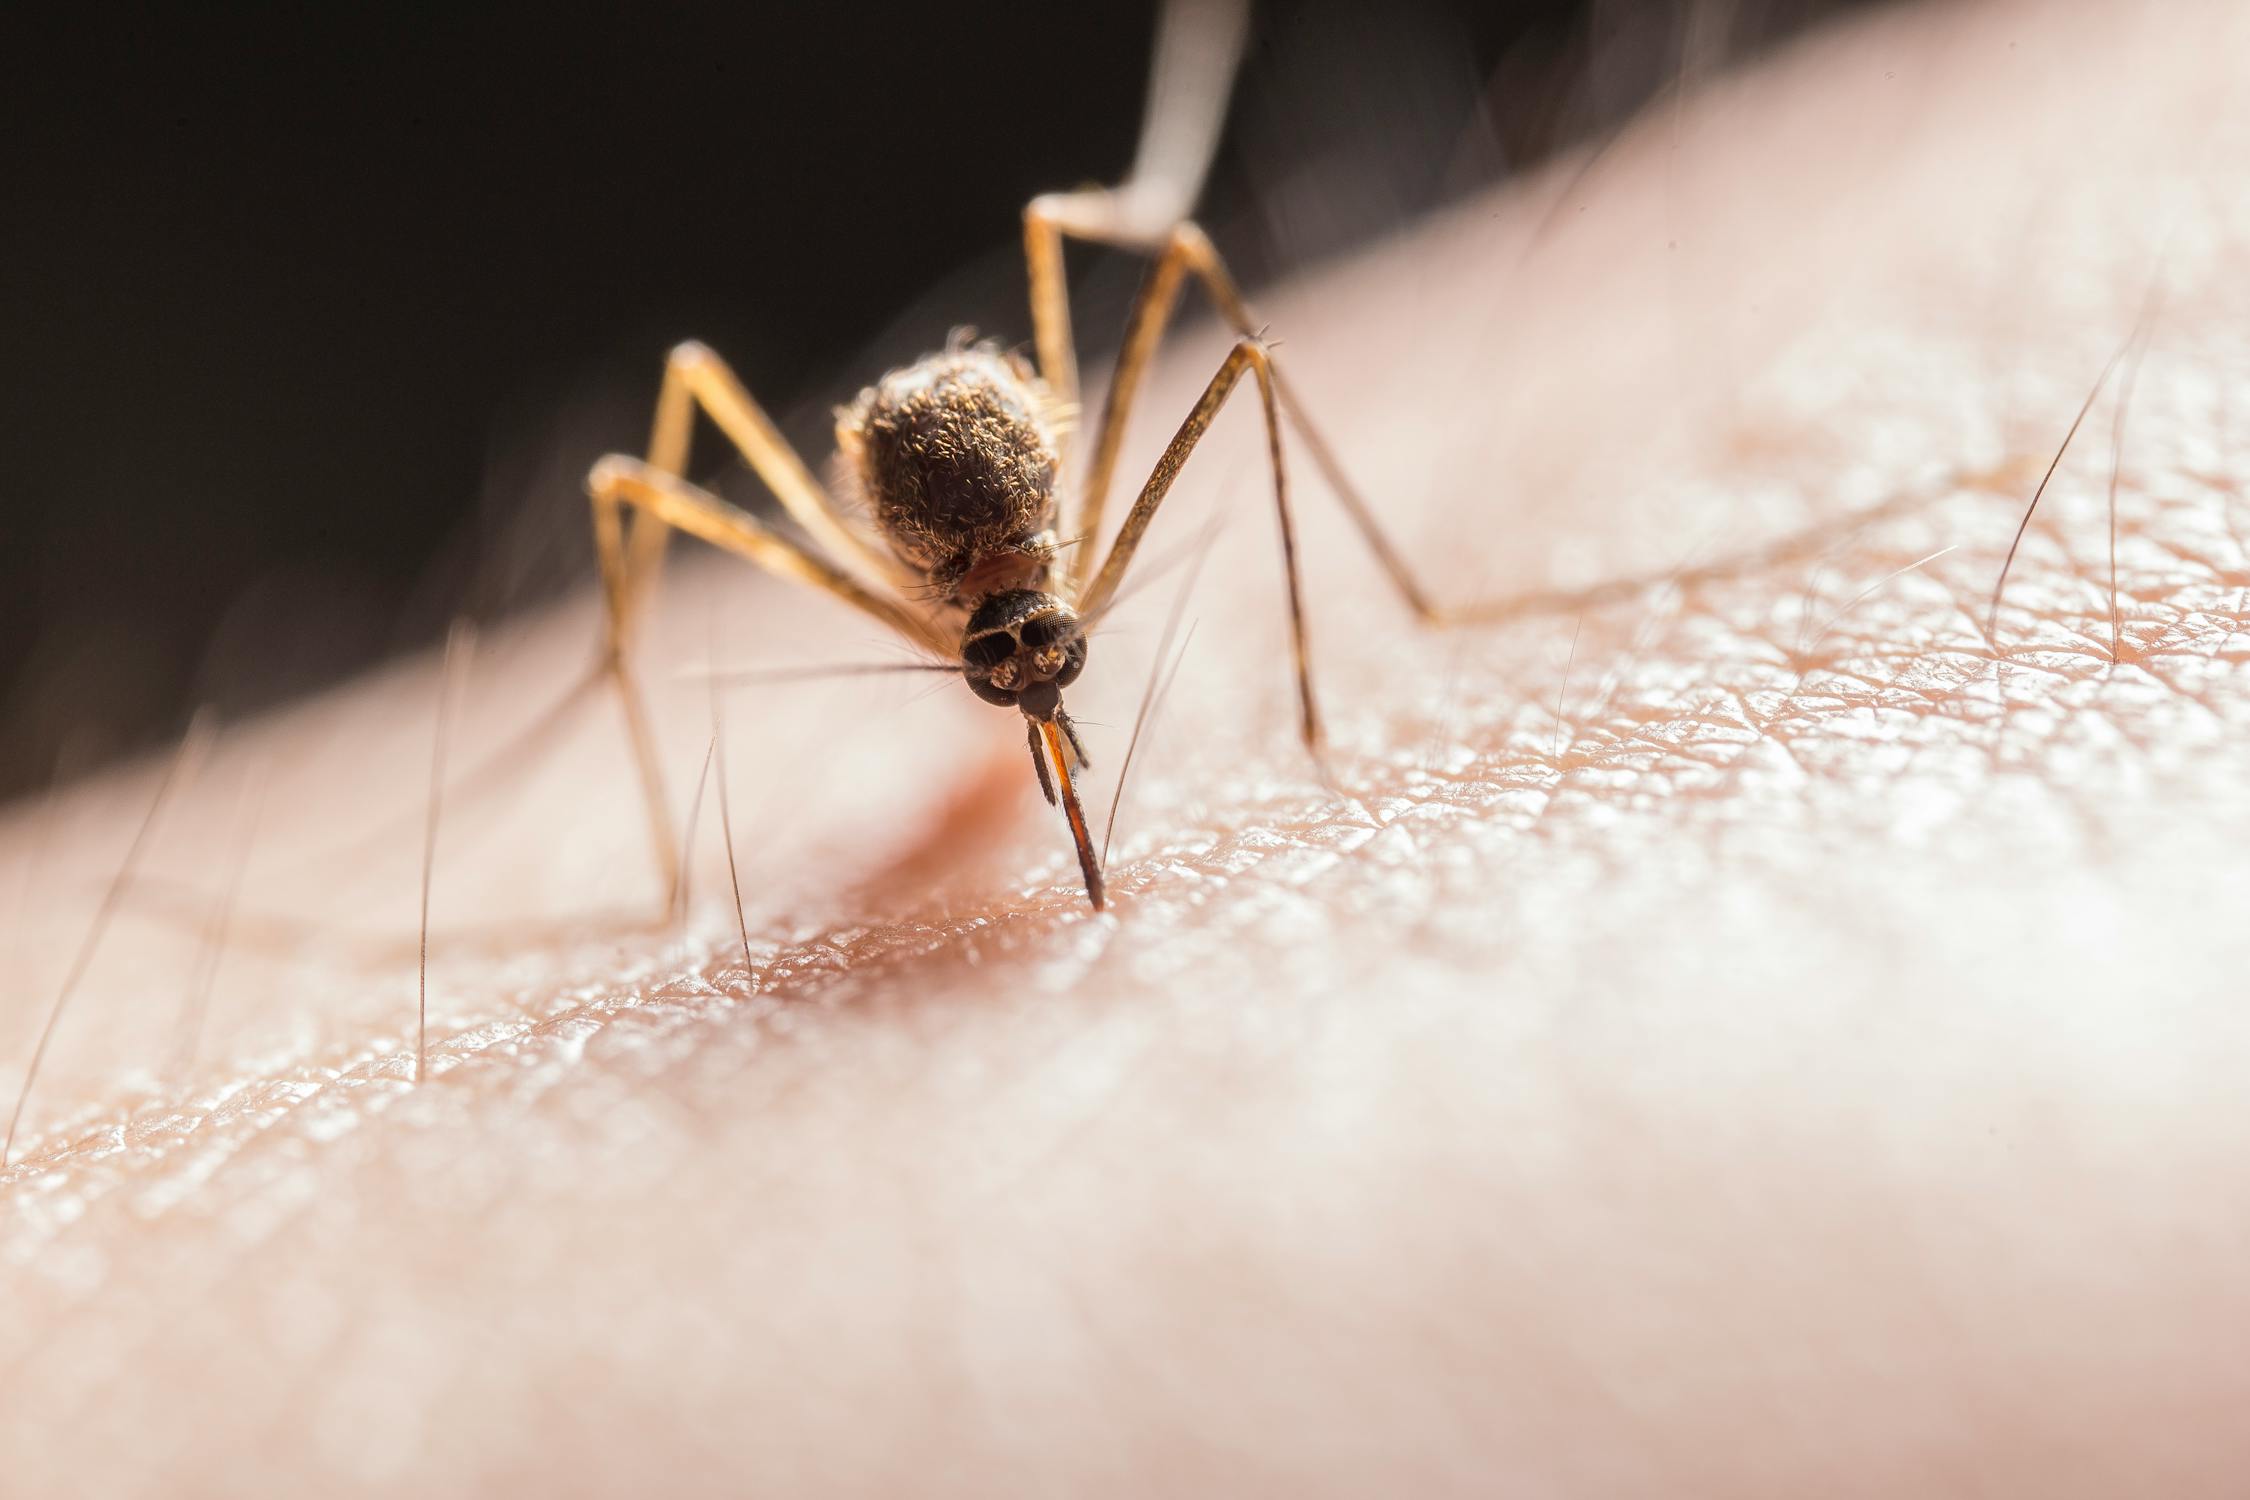 A close-up of a mosquito biting human skin. Photo by Pexels user Jimmy Chan. Used courtesy of pexels.com